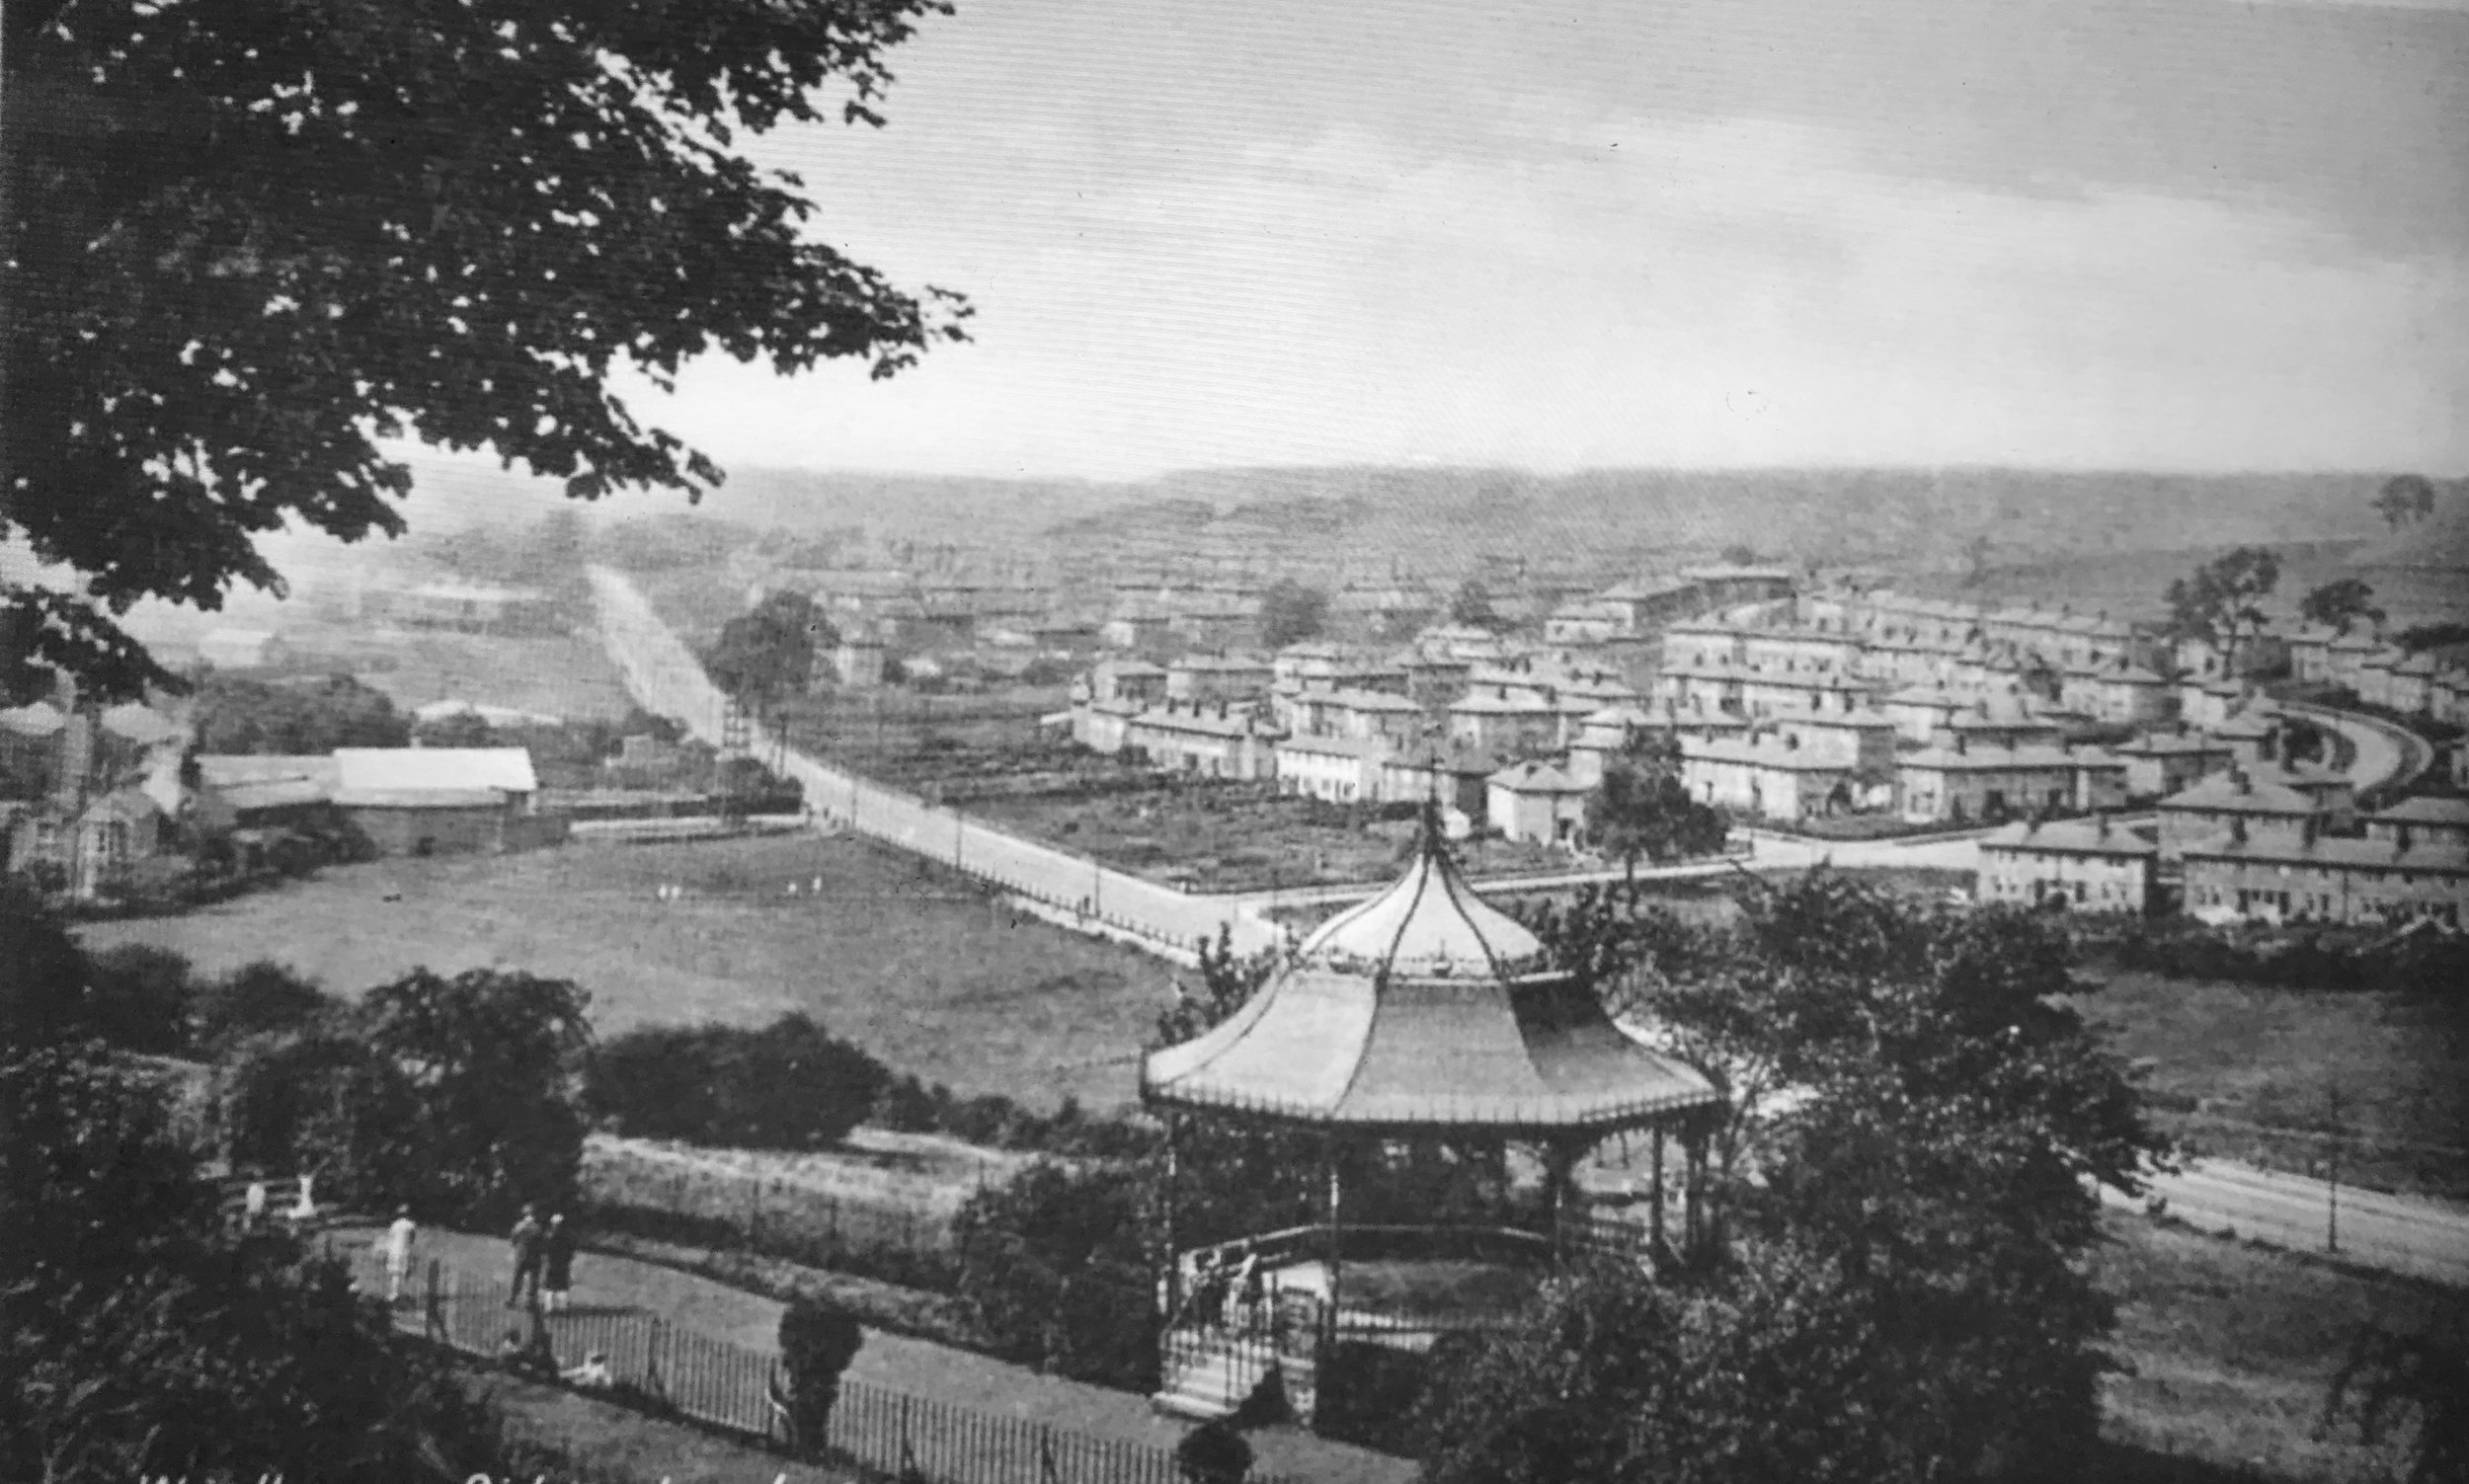 Bandstand and New Farm Hill Estate, from Woodhouse Ridge, 1930s